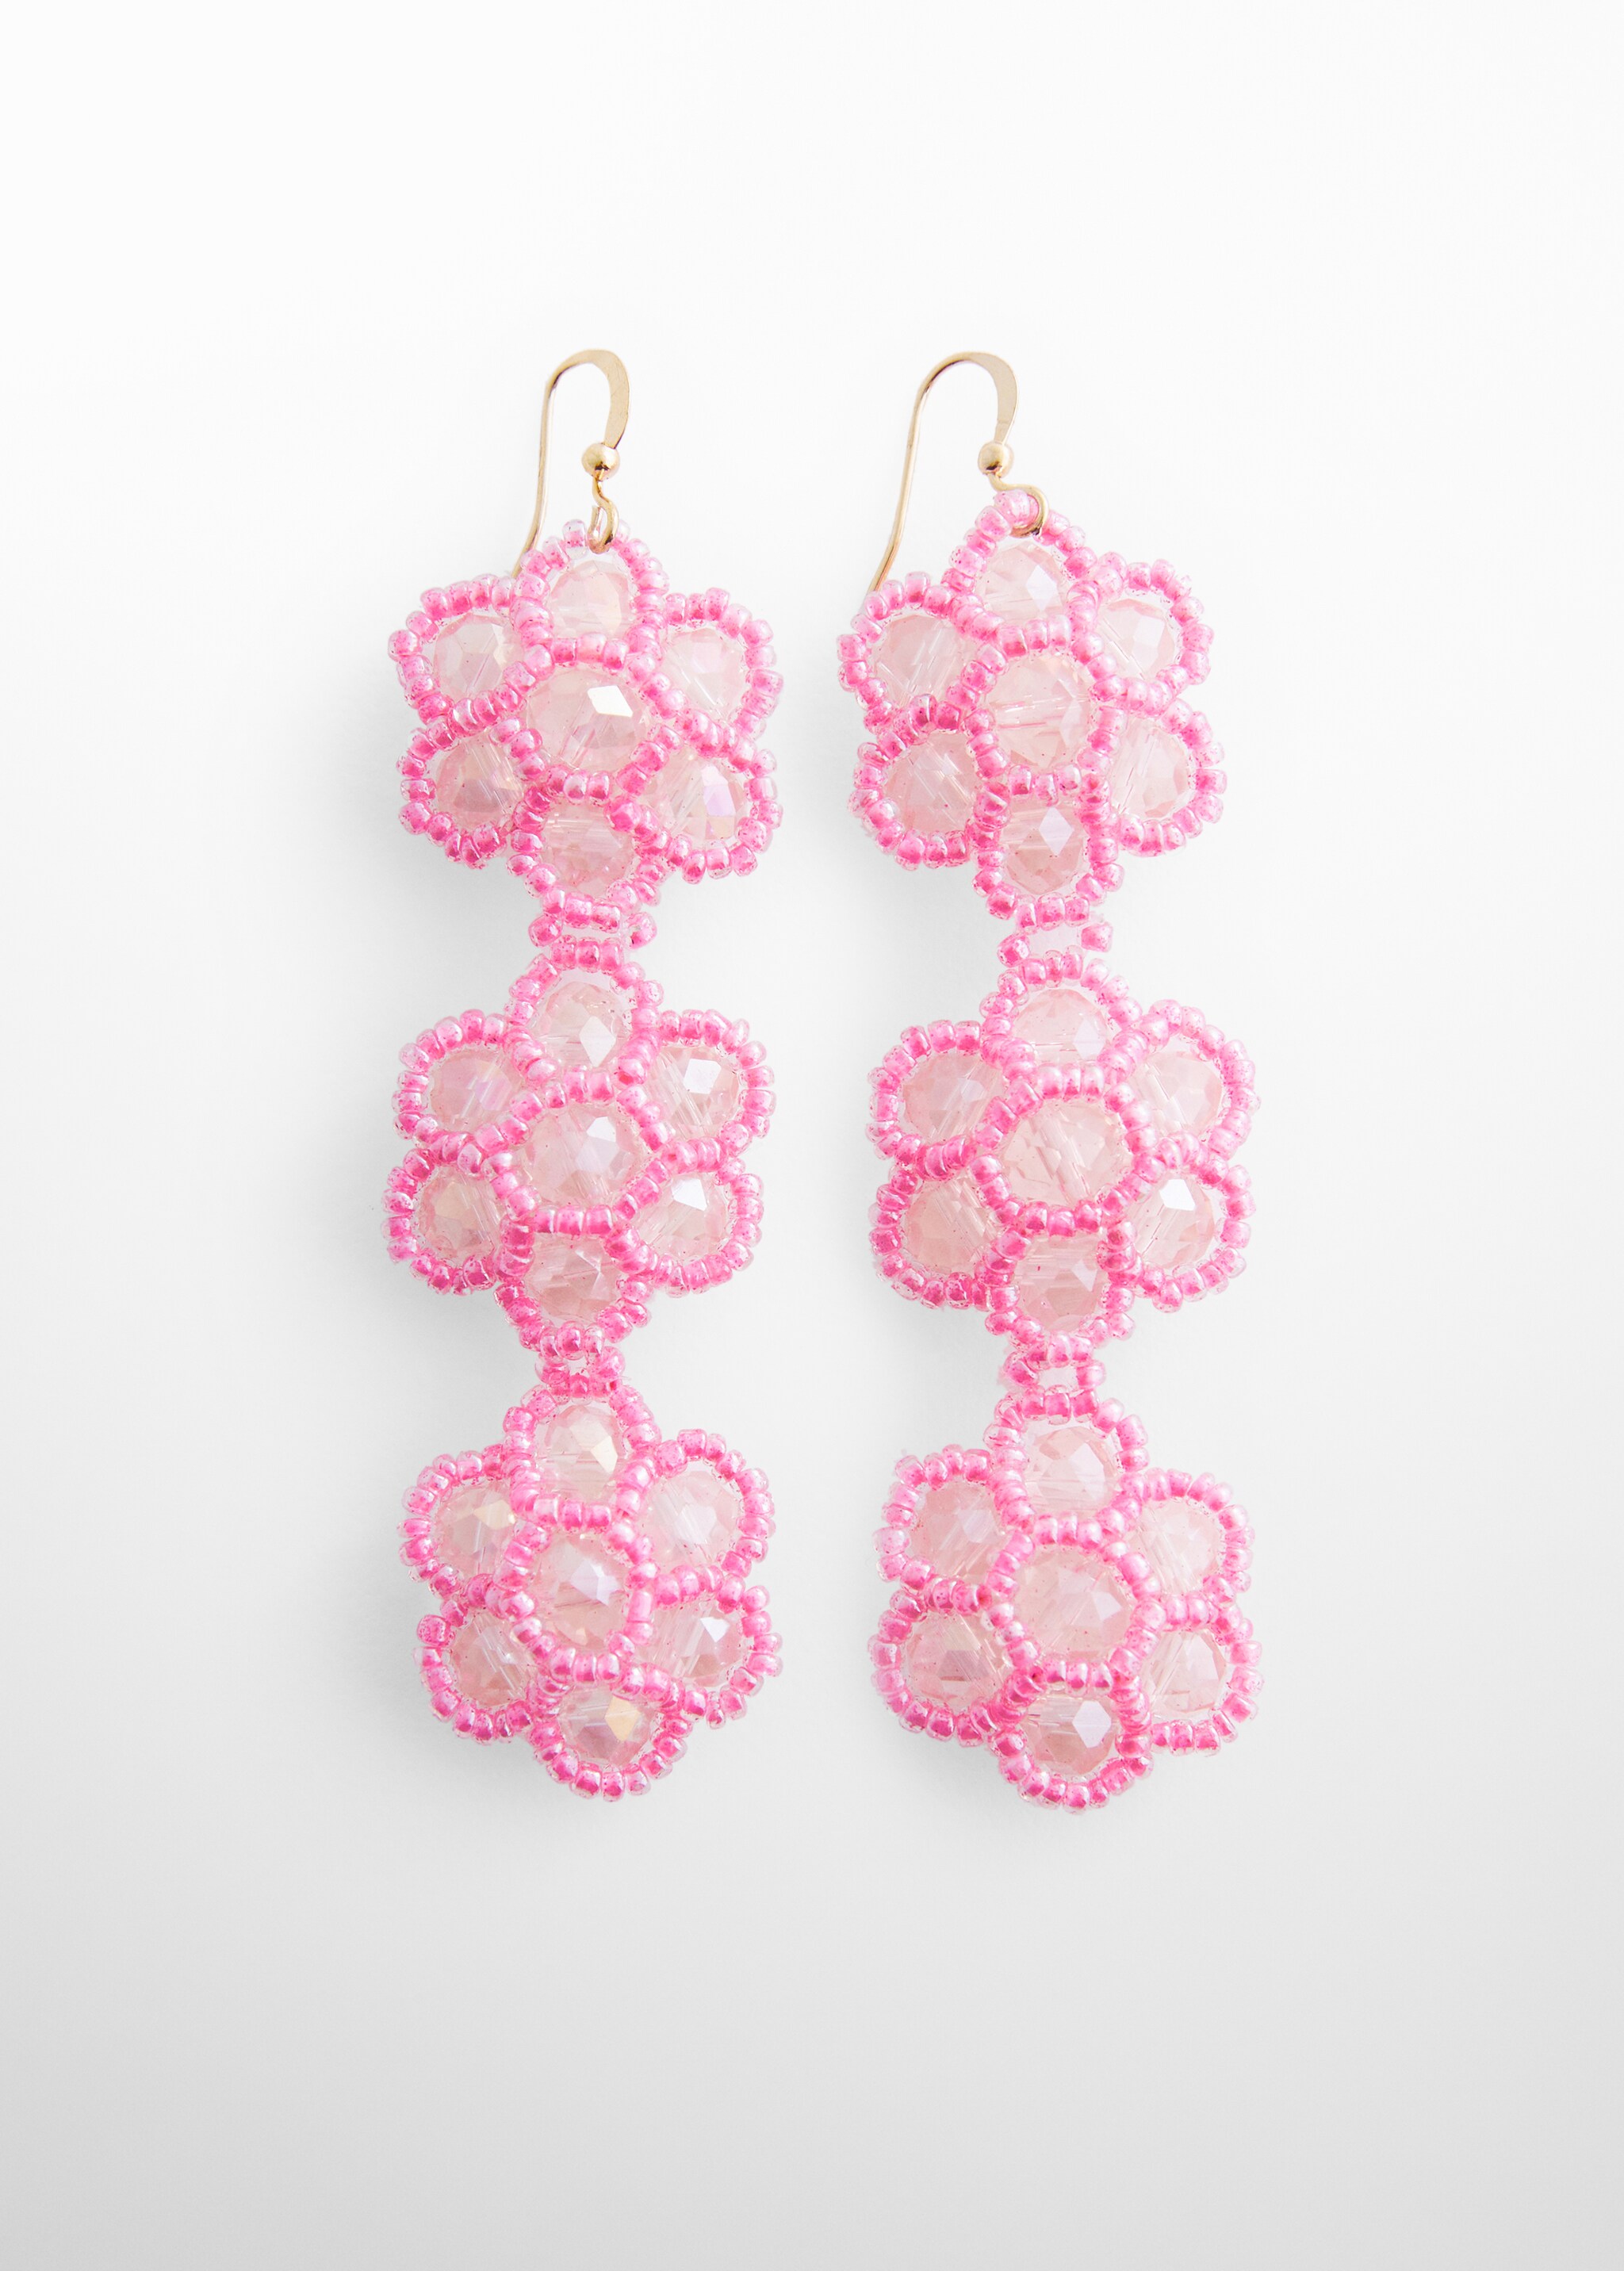 Flower crystal earrings - Article without model